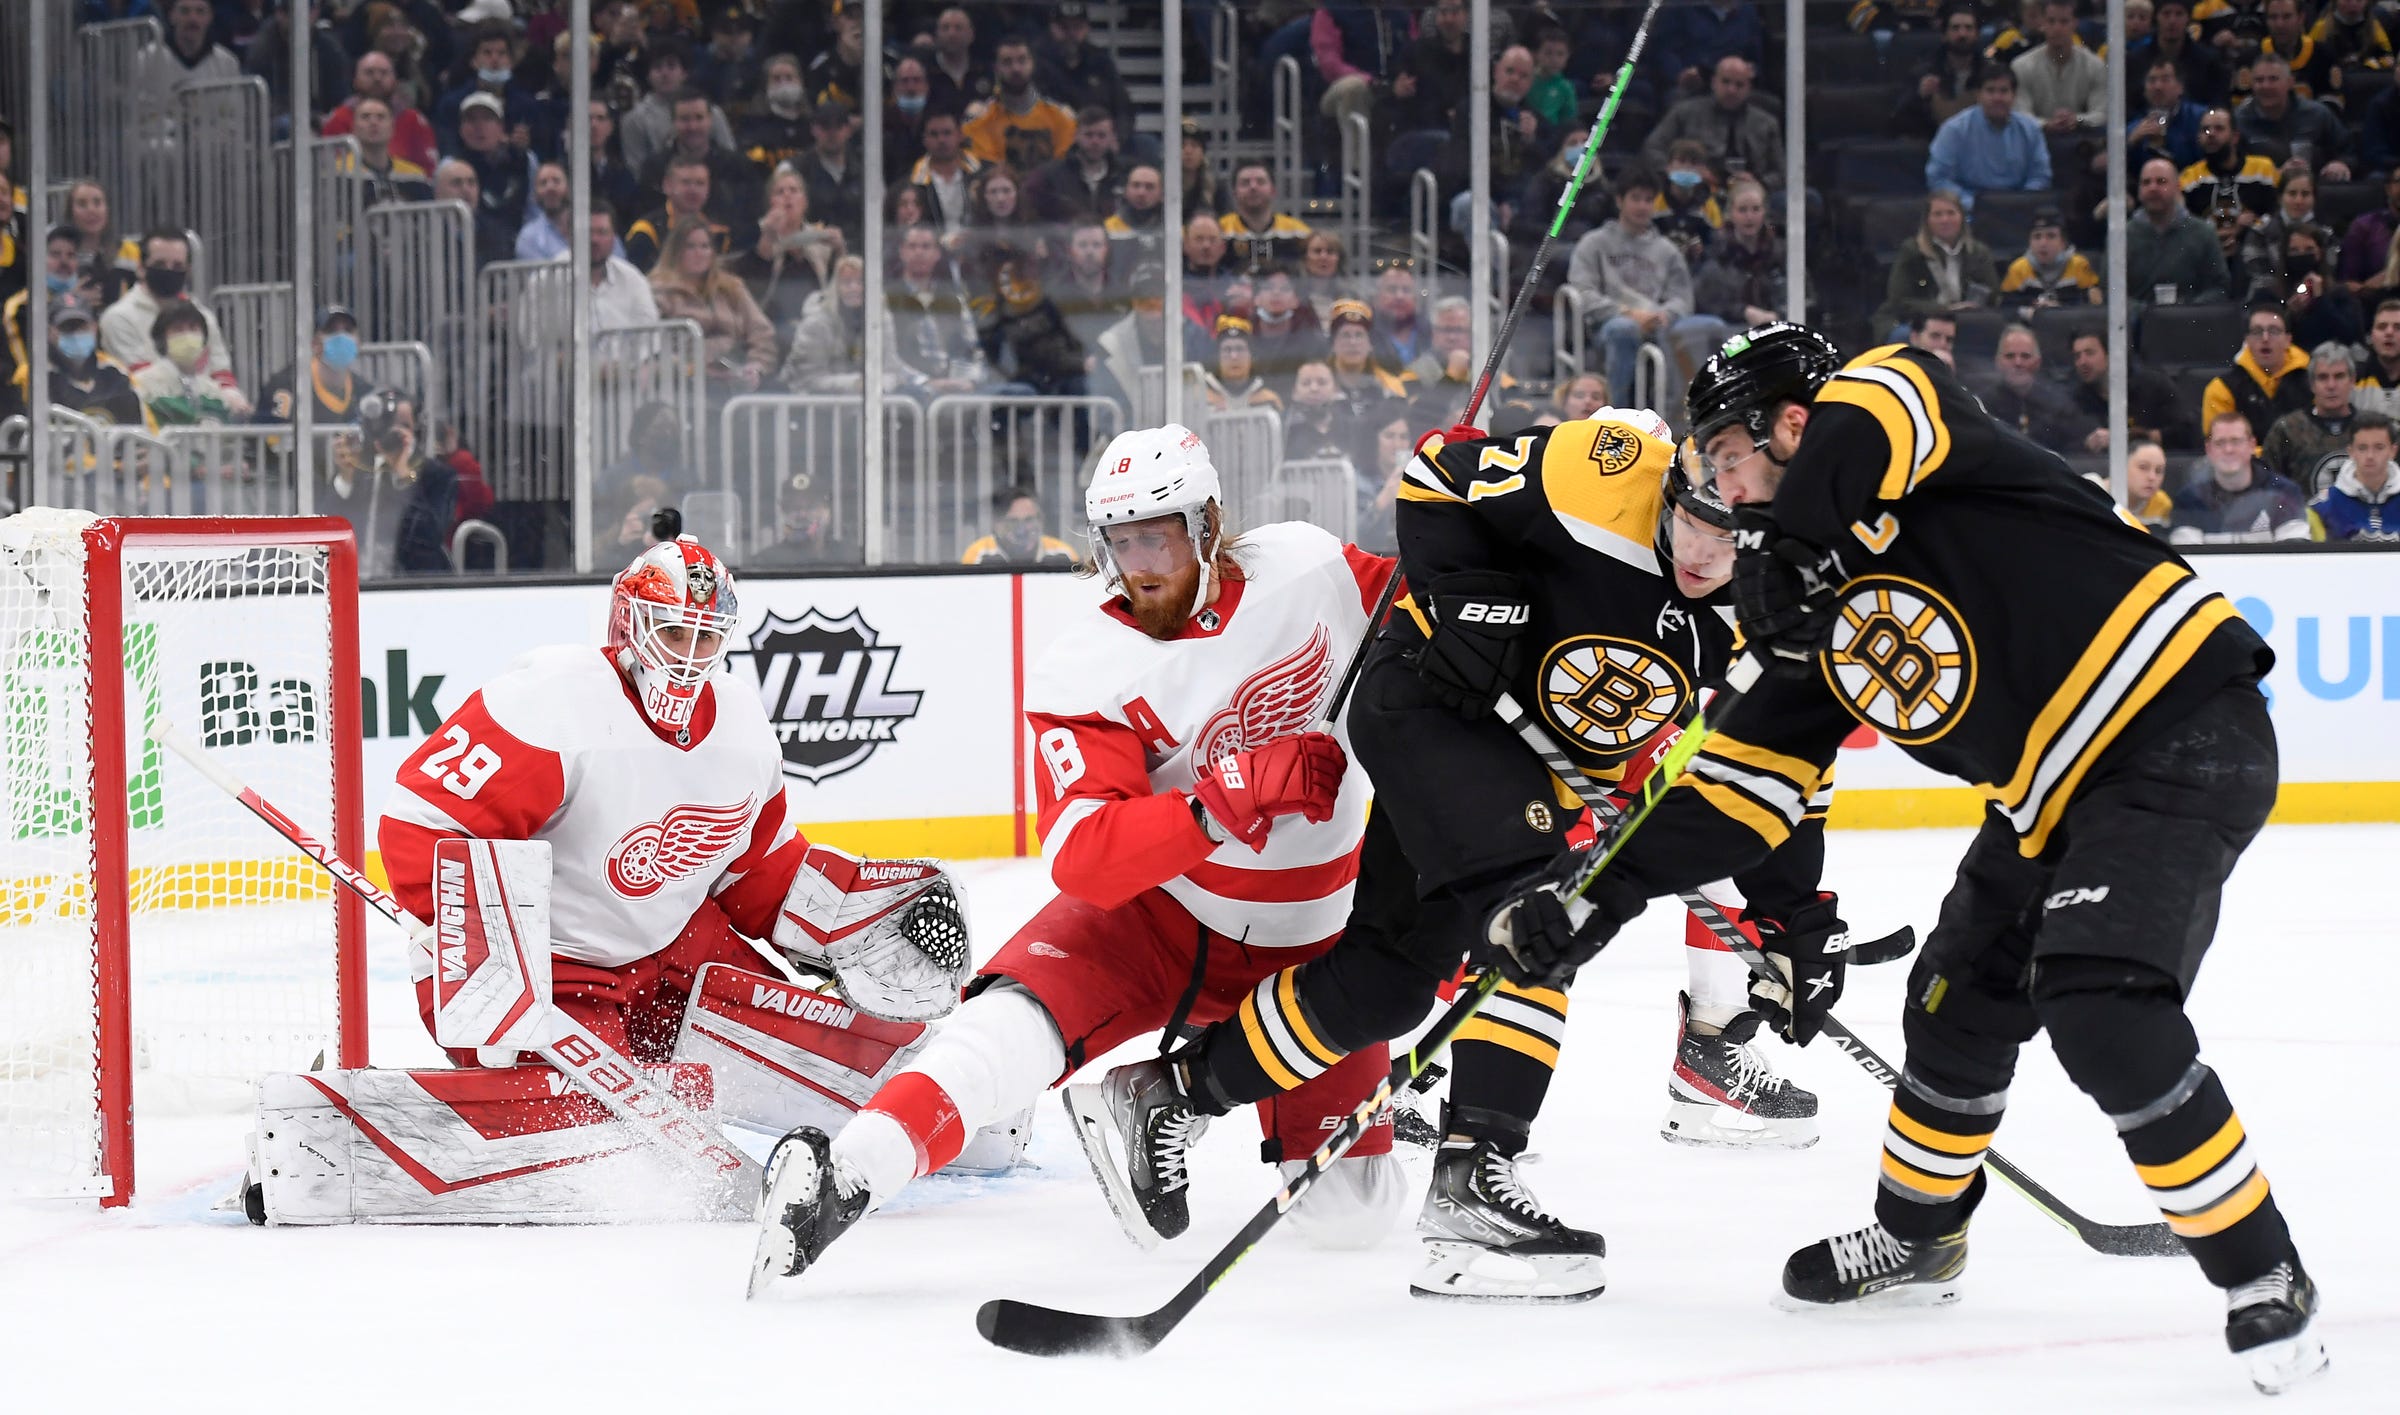 Detroit Red Wings suffer 5-1 defeat at Boston Bruins